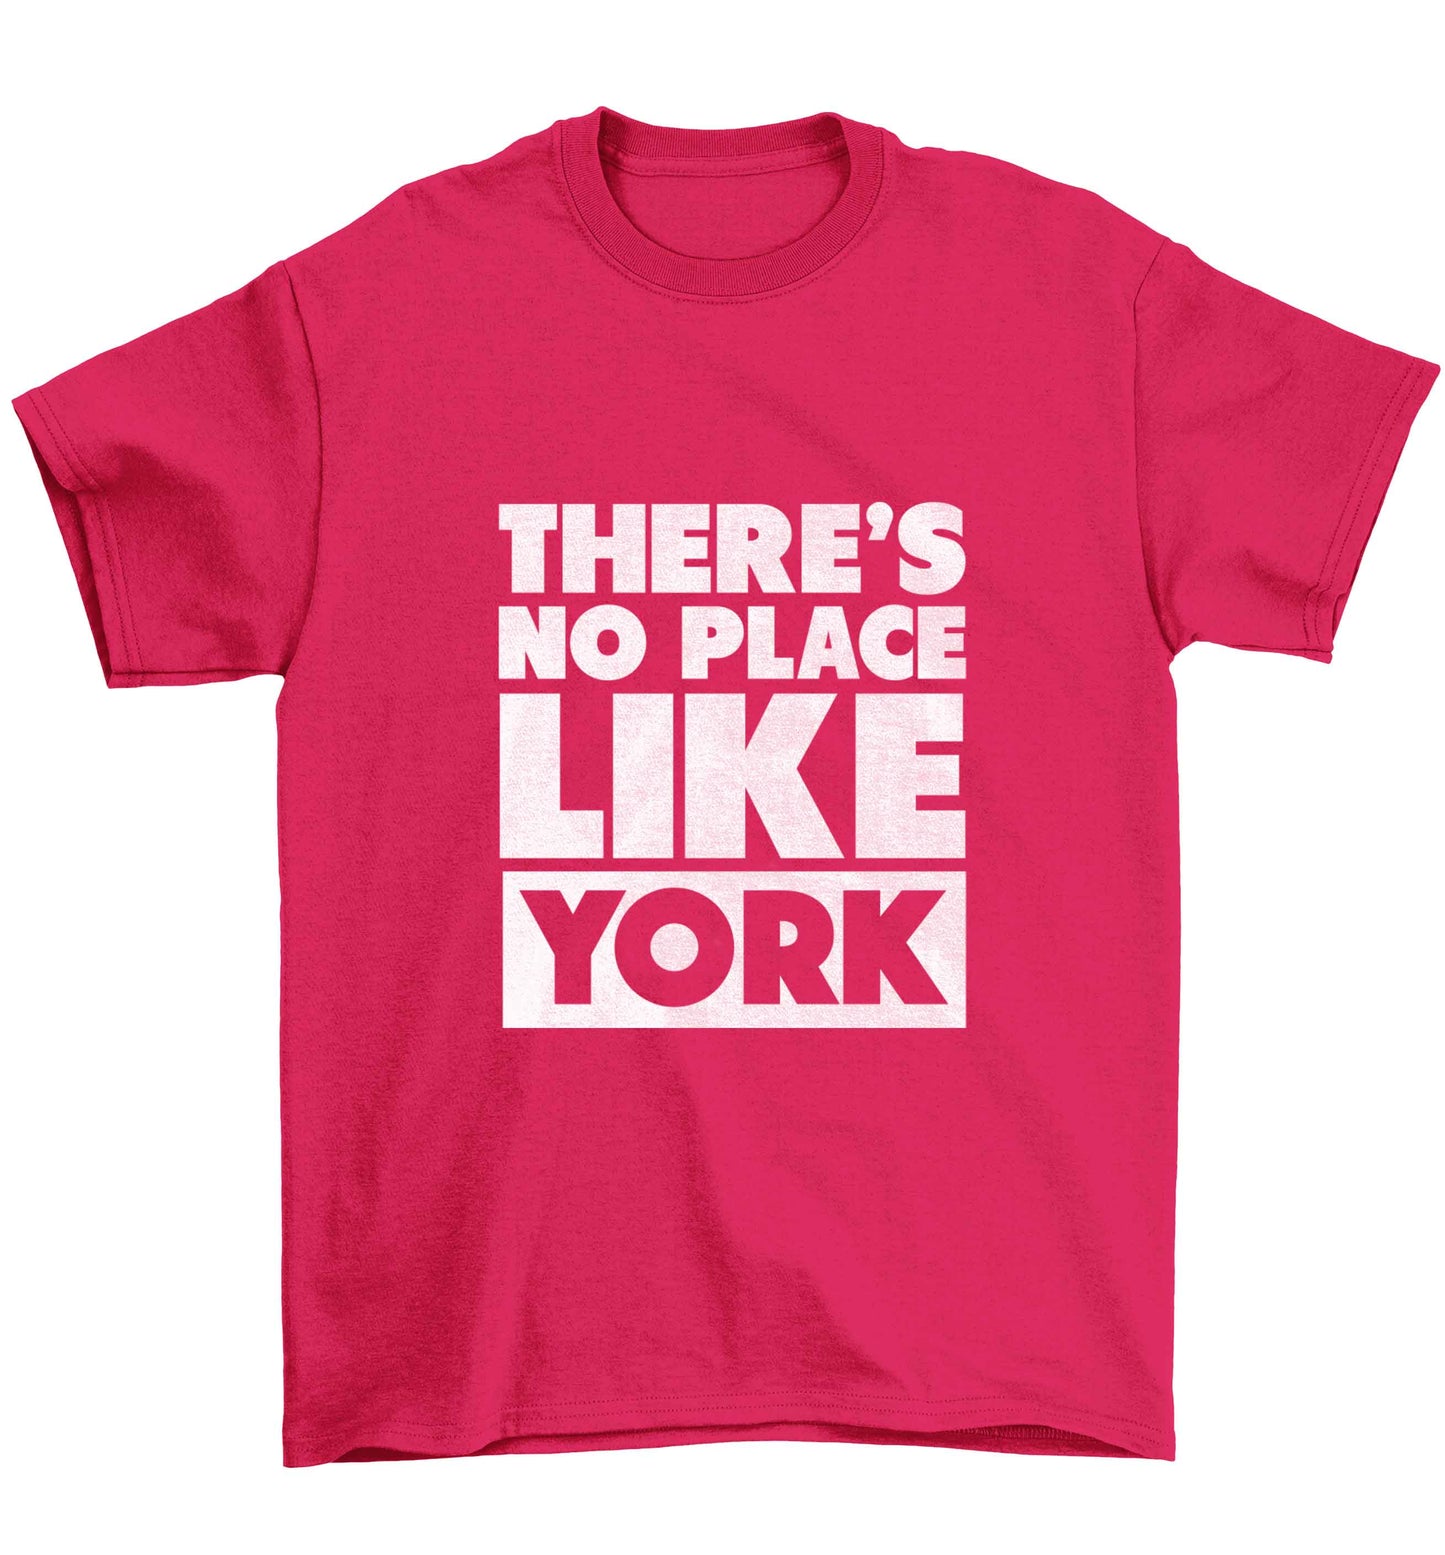 There's no place like york Children's pink Tshirt 12-13 Years